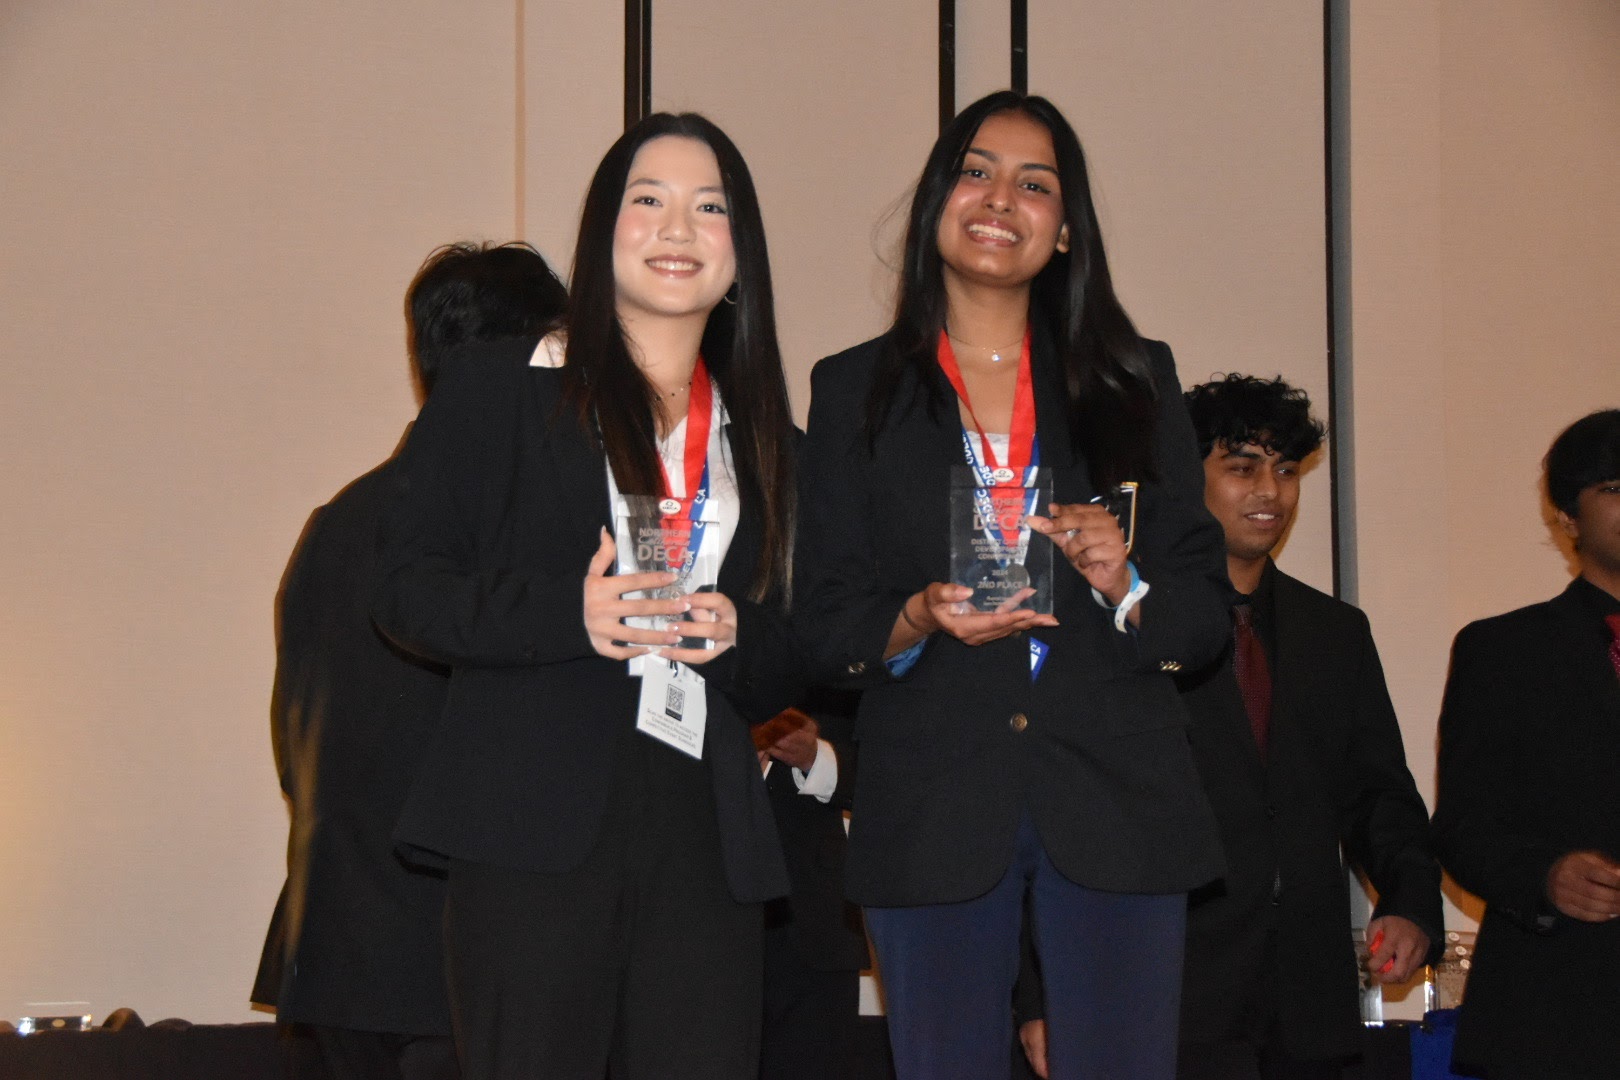 AV+DECA+competes+at+NorCal+Conference